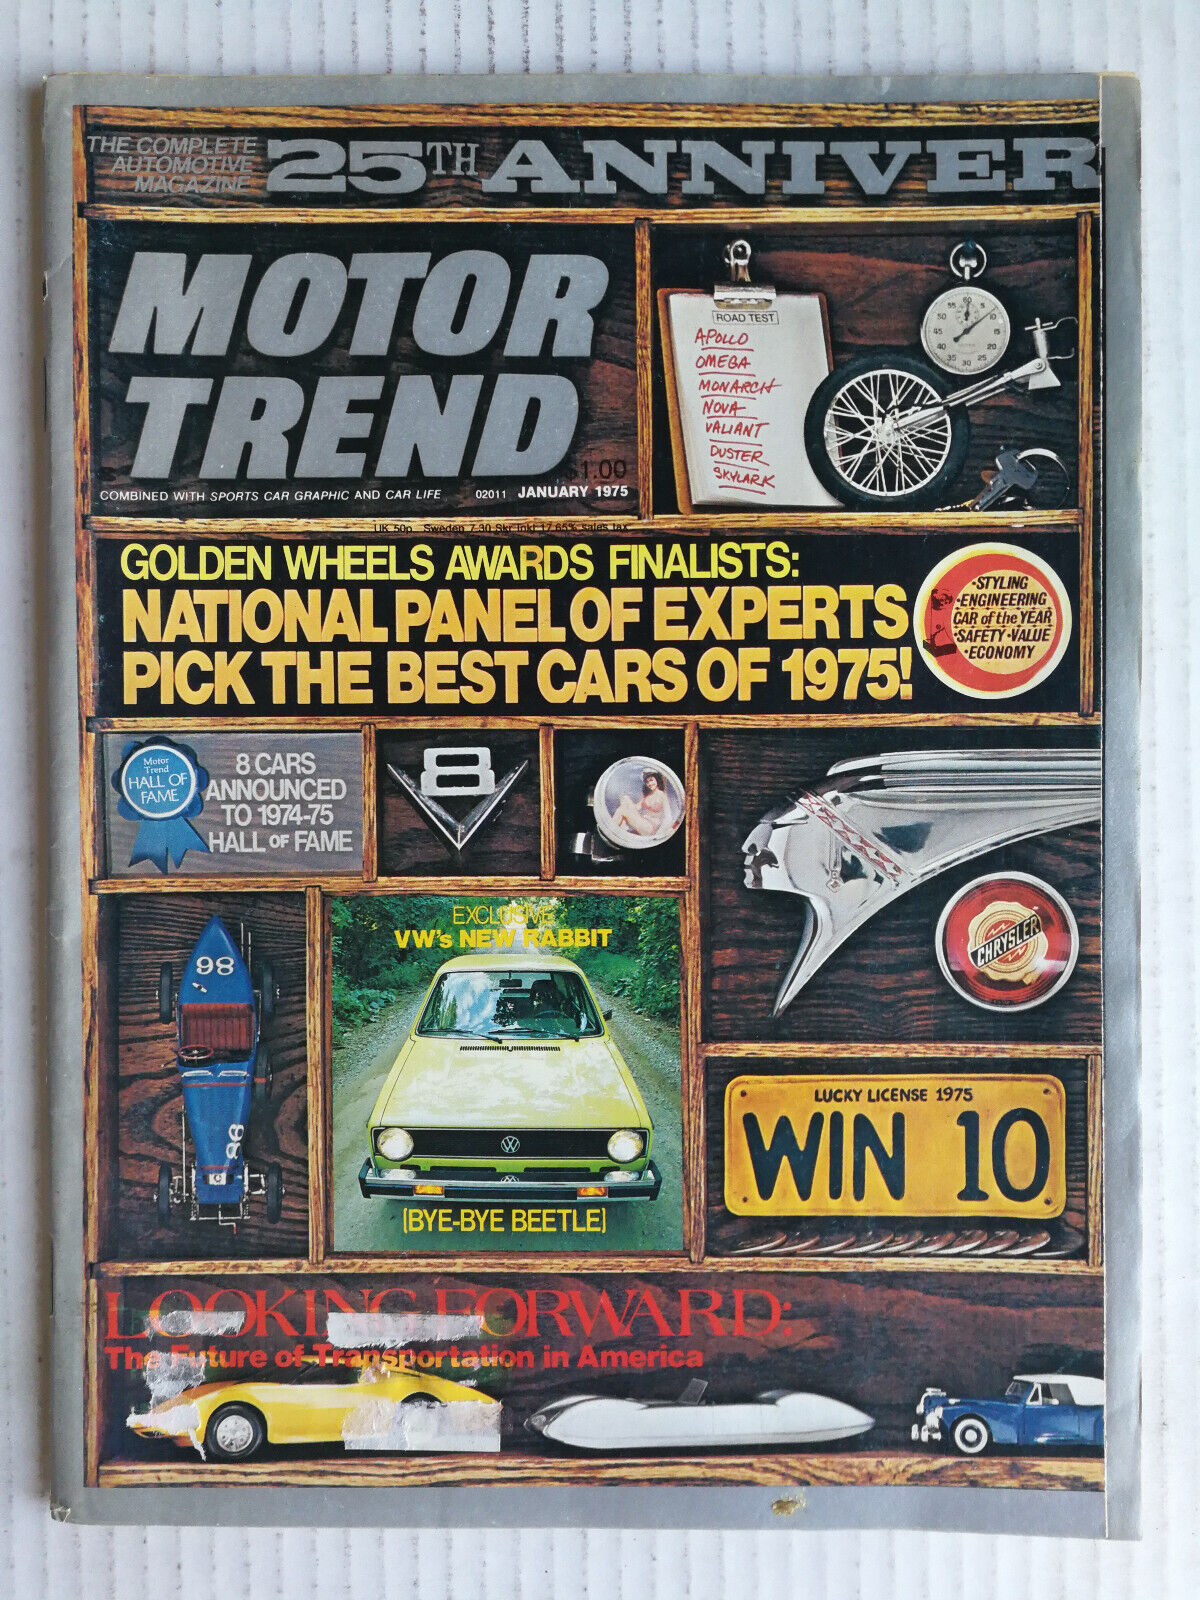 Motor Trend Magazine 1975 - The Complete Year - All 12 Issues